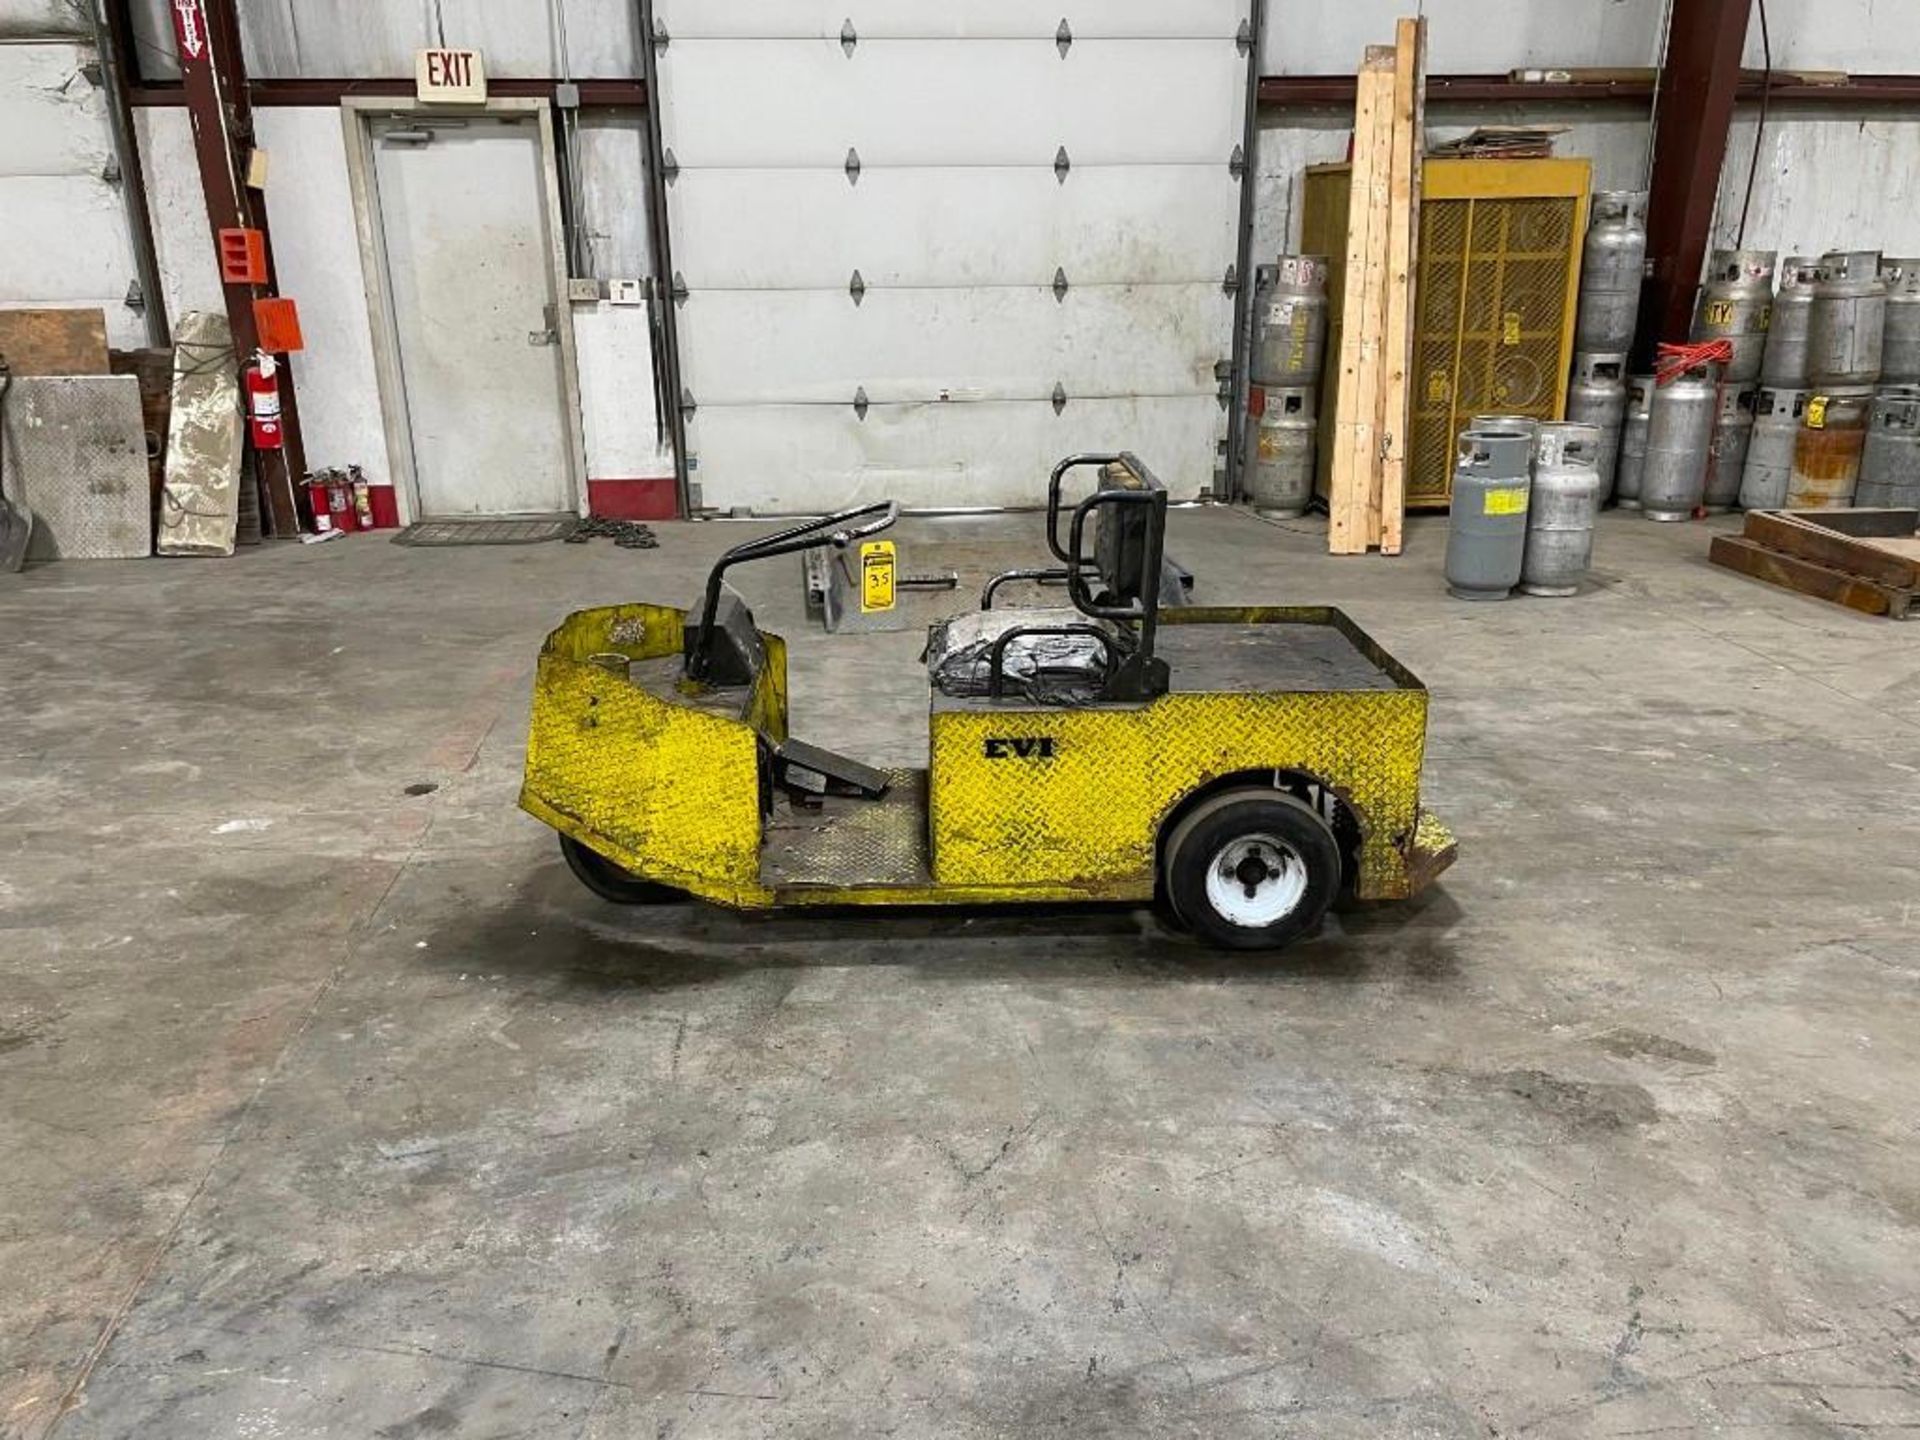 EVI 3-WHEEL ELECTRIC PERSONNEL CART, 24V, NEEDS WORK